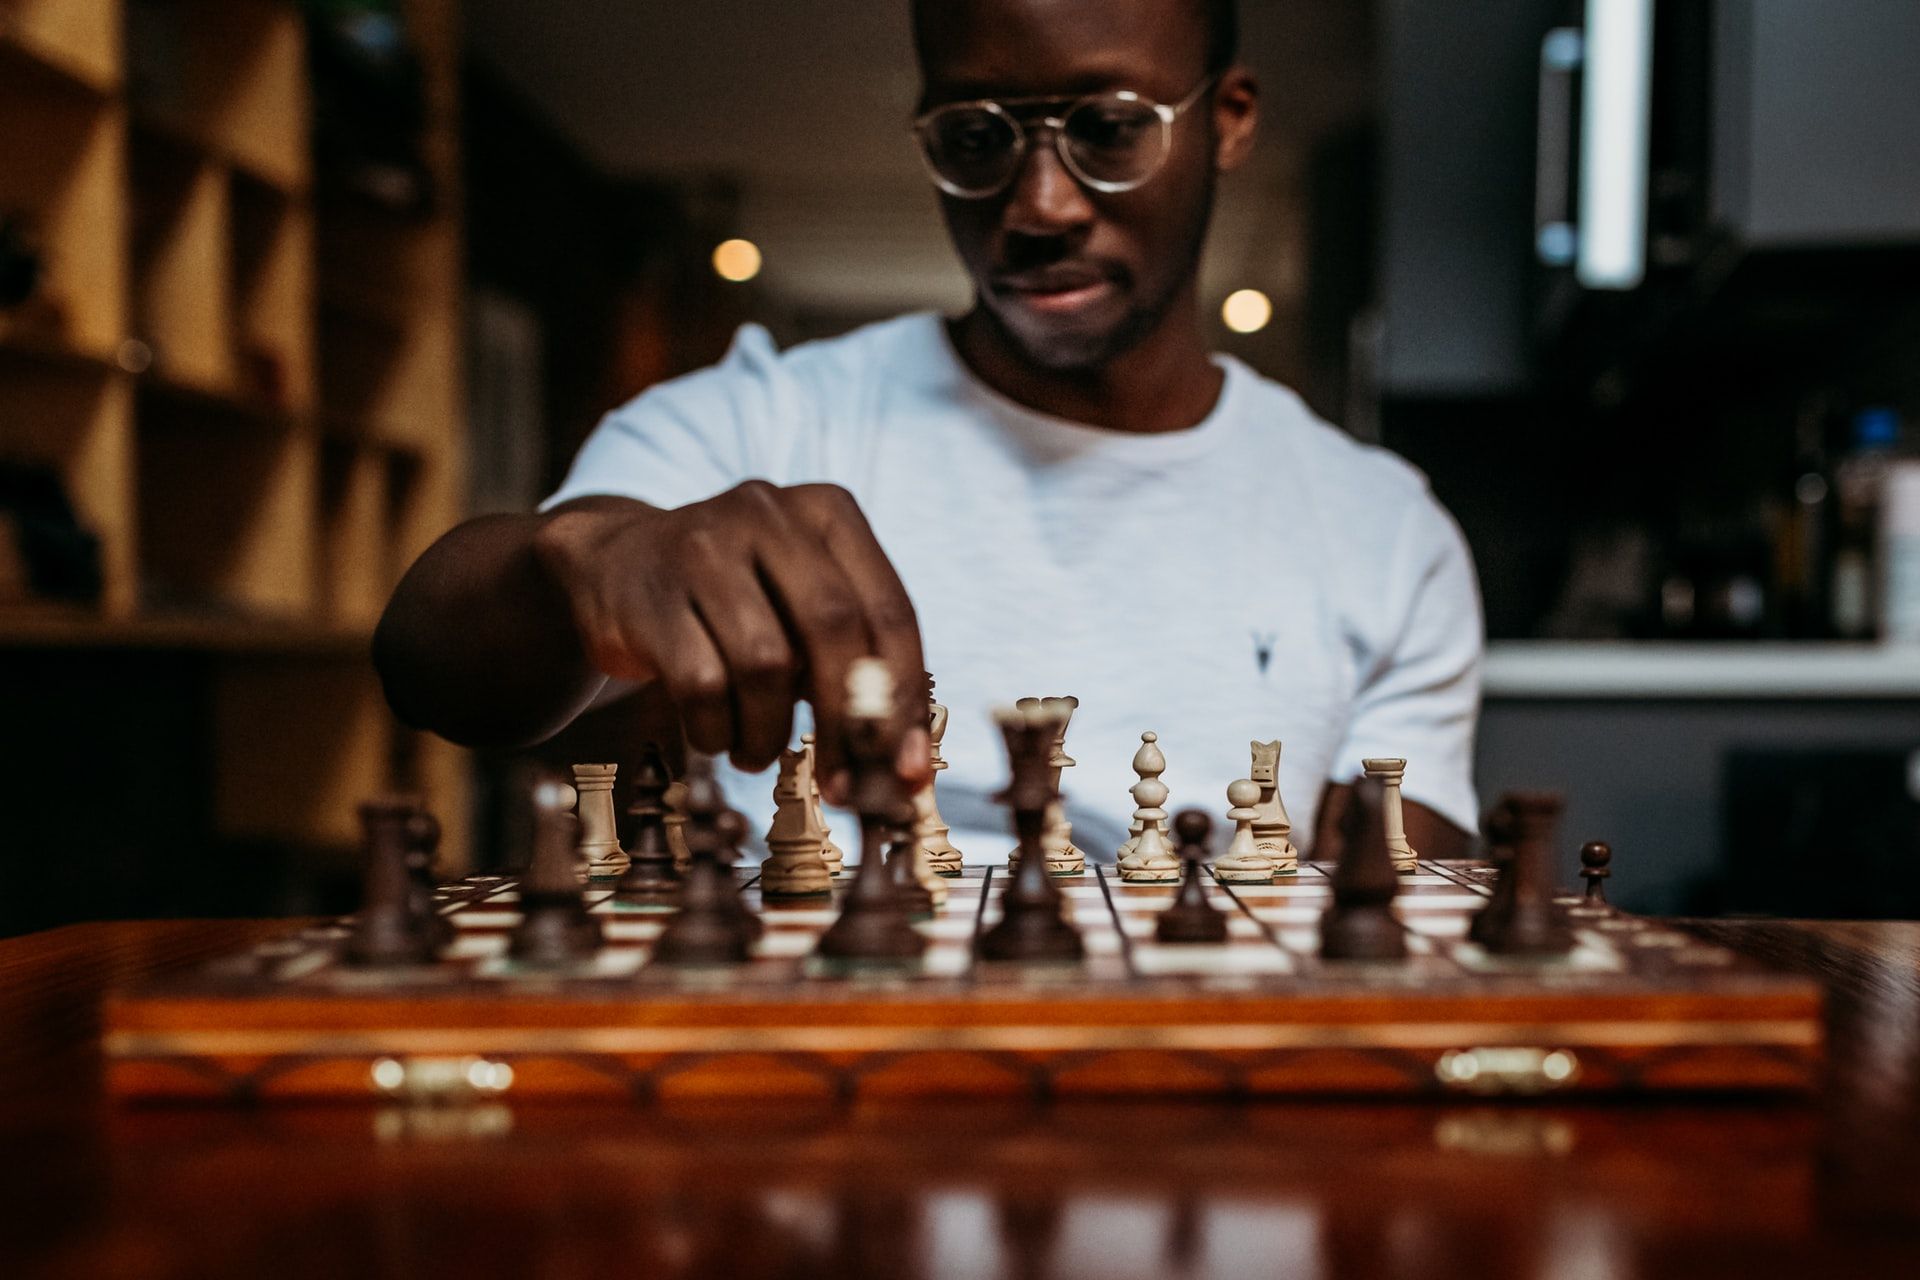 Is it normal to expect that people know how to play chess or is that not  common knowledge? - Quora